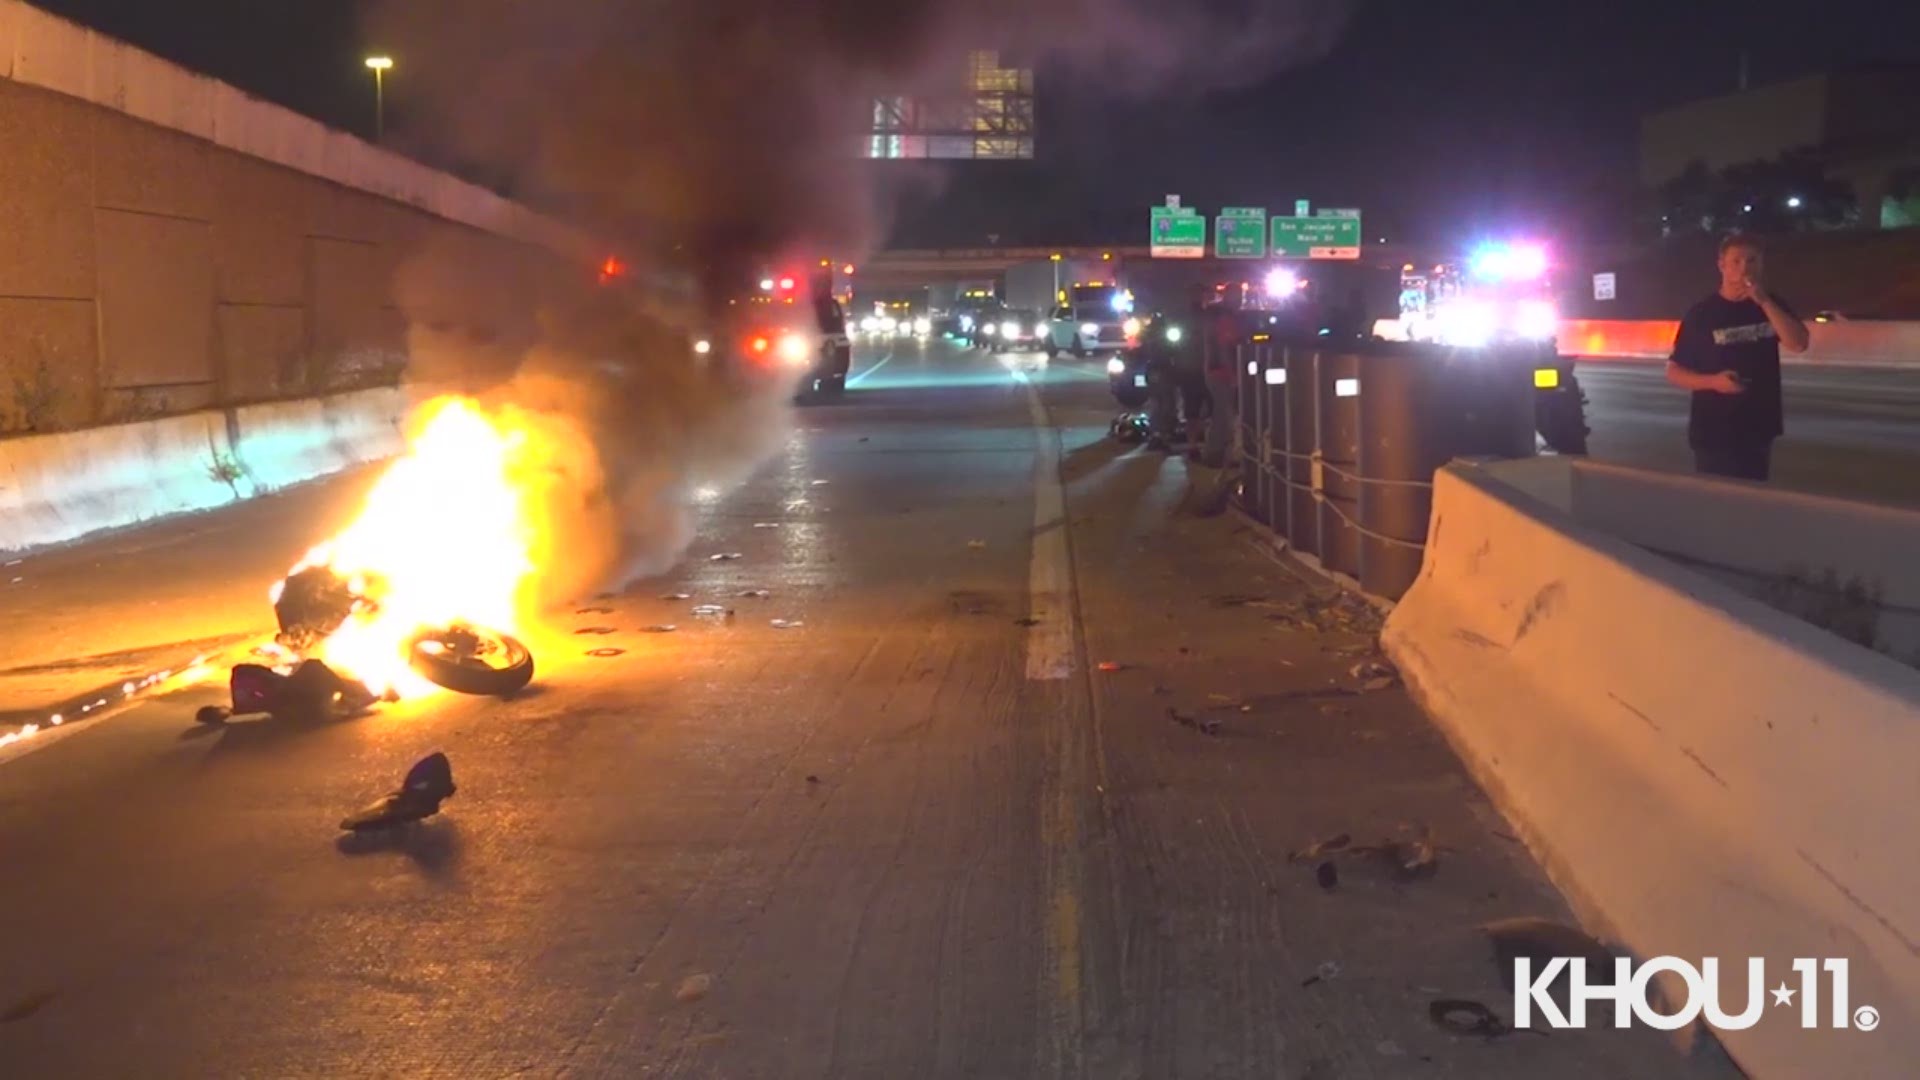 A motorcycle burst into flames during a fiery crash on the East Freeway near downtown Houston Wednesday night.